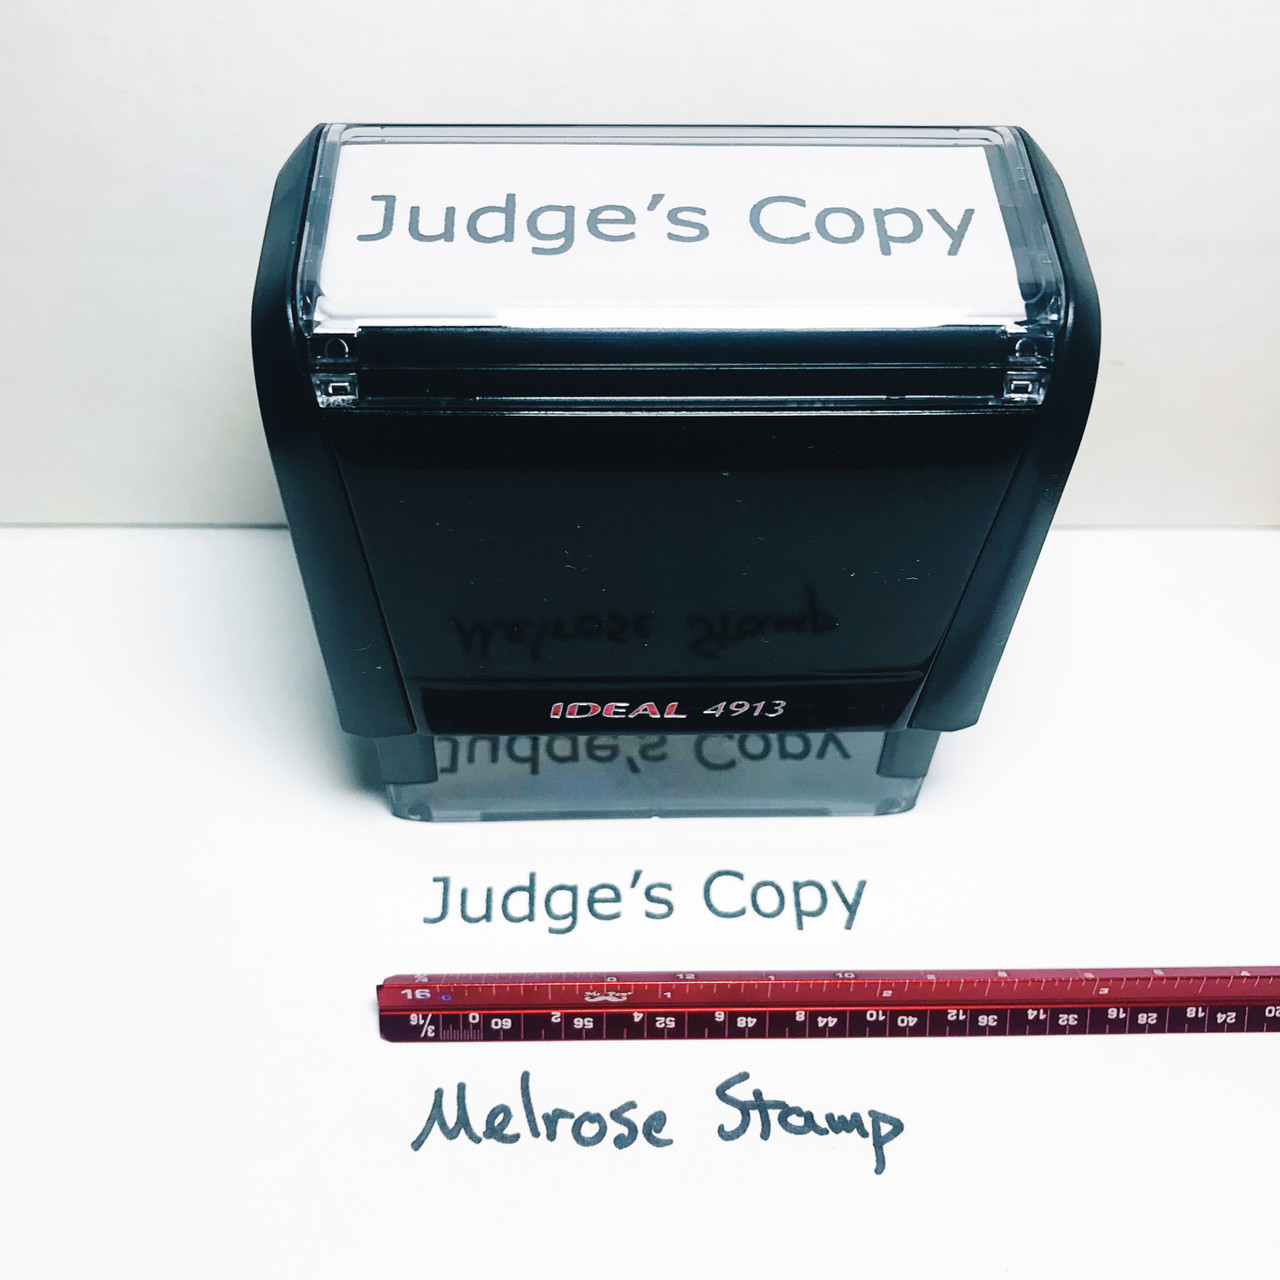 JUDGE'S COPY Rubber Stamp for office use self-inking